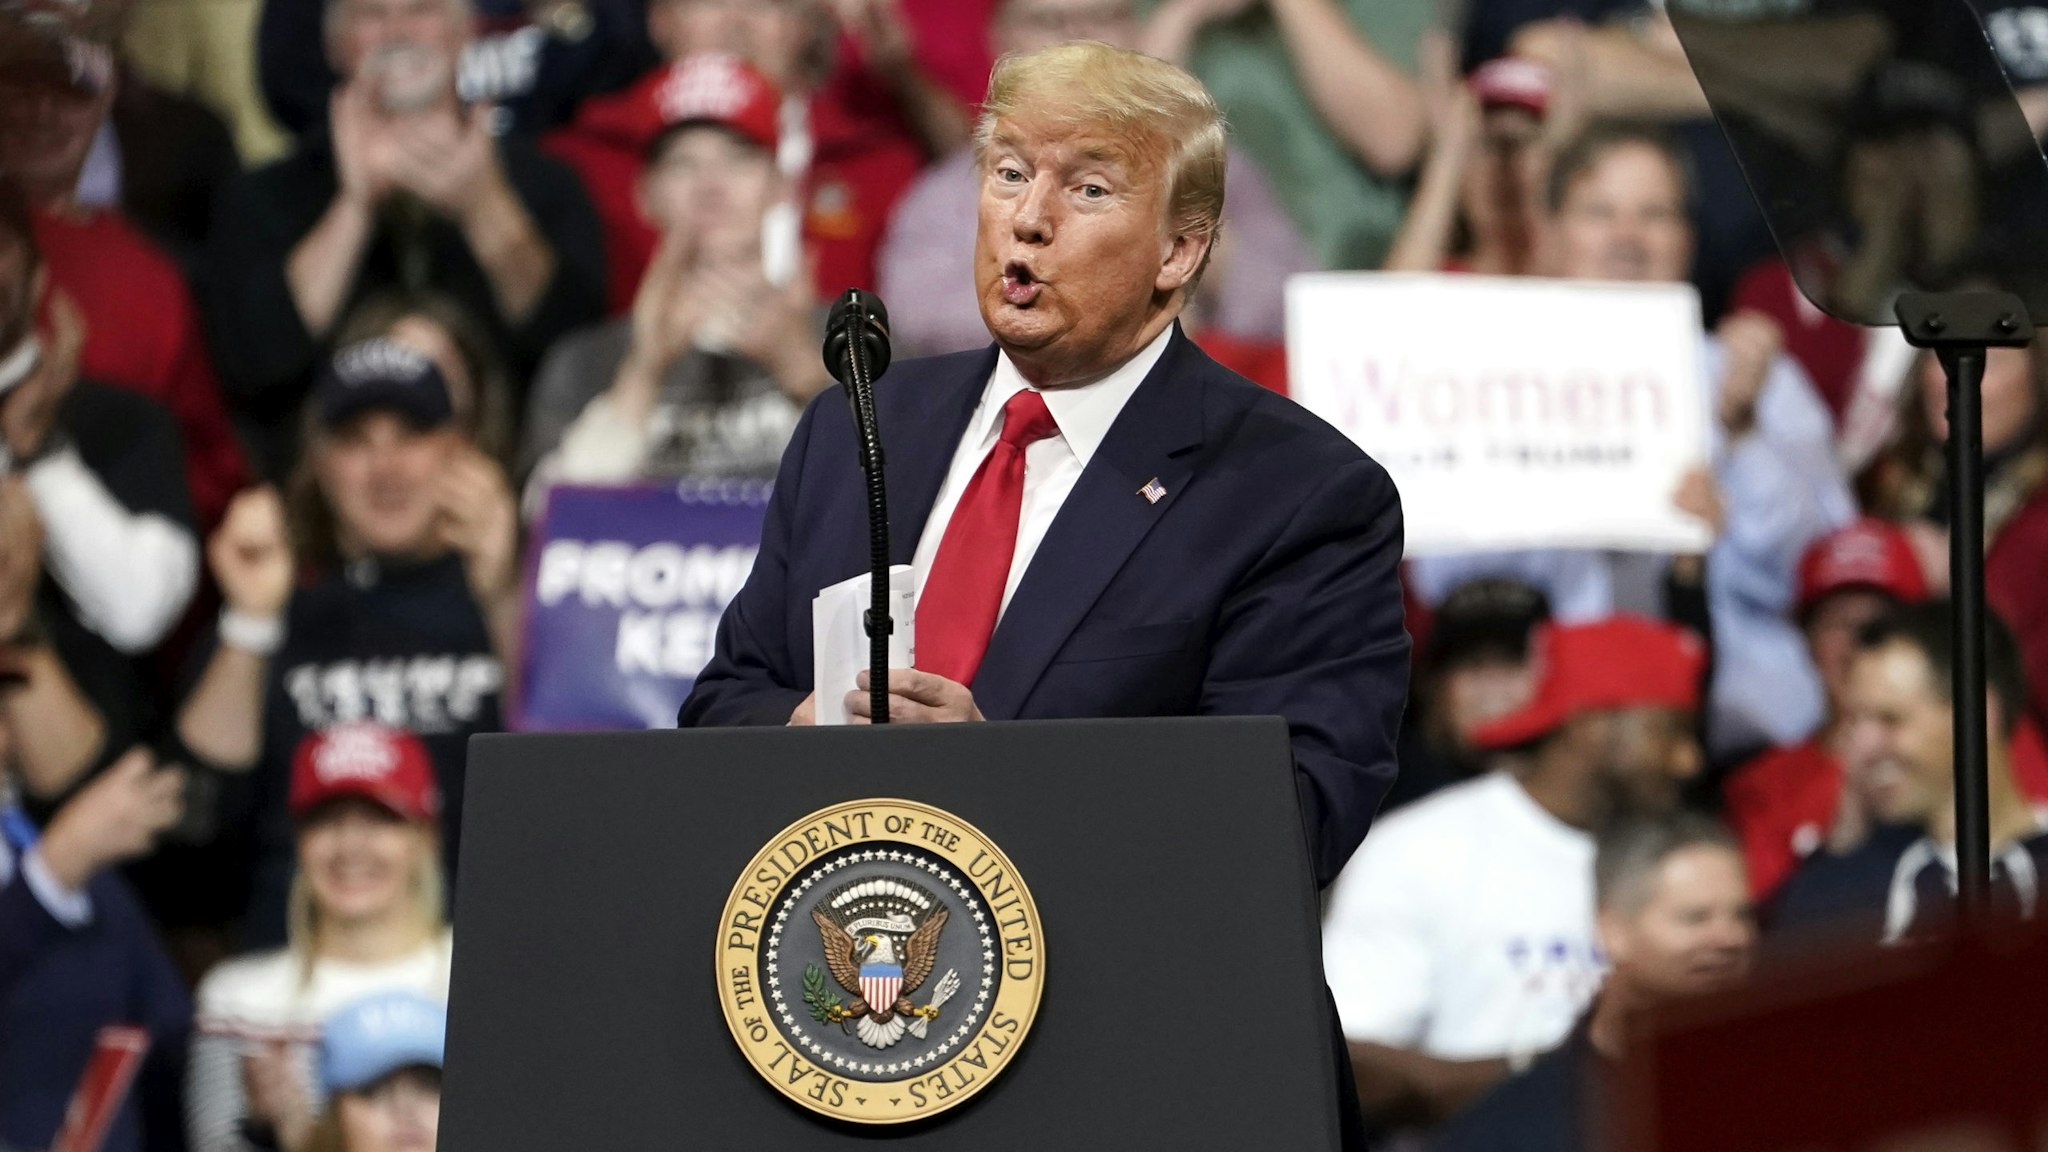 MANCHESTER, NH - FEBRUARY 10: U.S. President Donald Trump speaks at a rally at Southern New Hampshire University Arena on February 10, 2020 in Manchester, New Hampshire. New Hampshire holds its first-in-the-nation primary tomorrow.